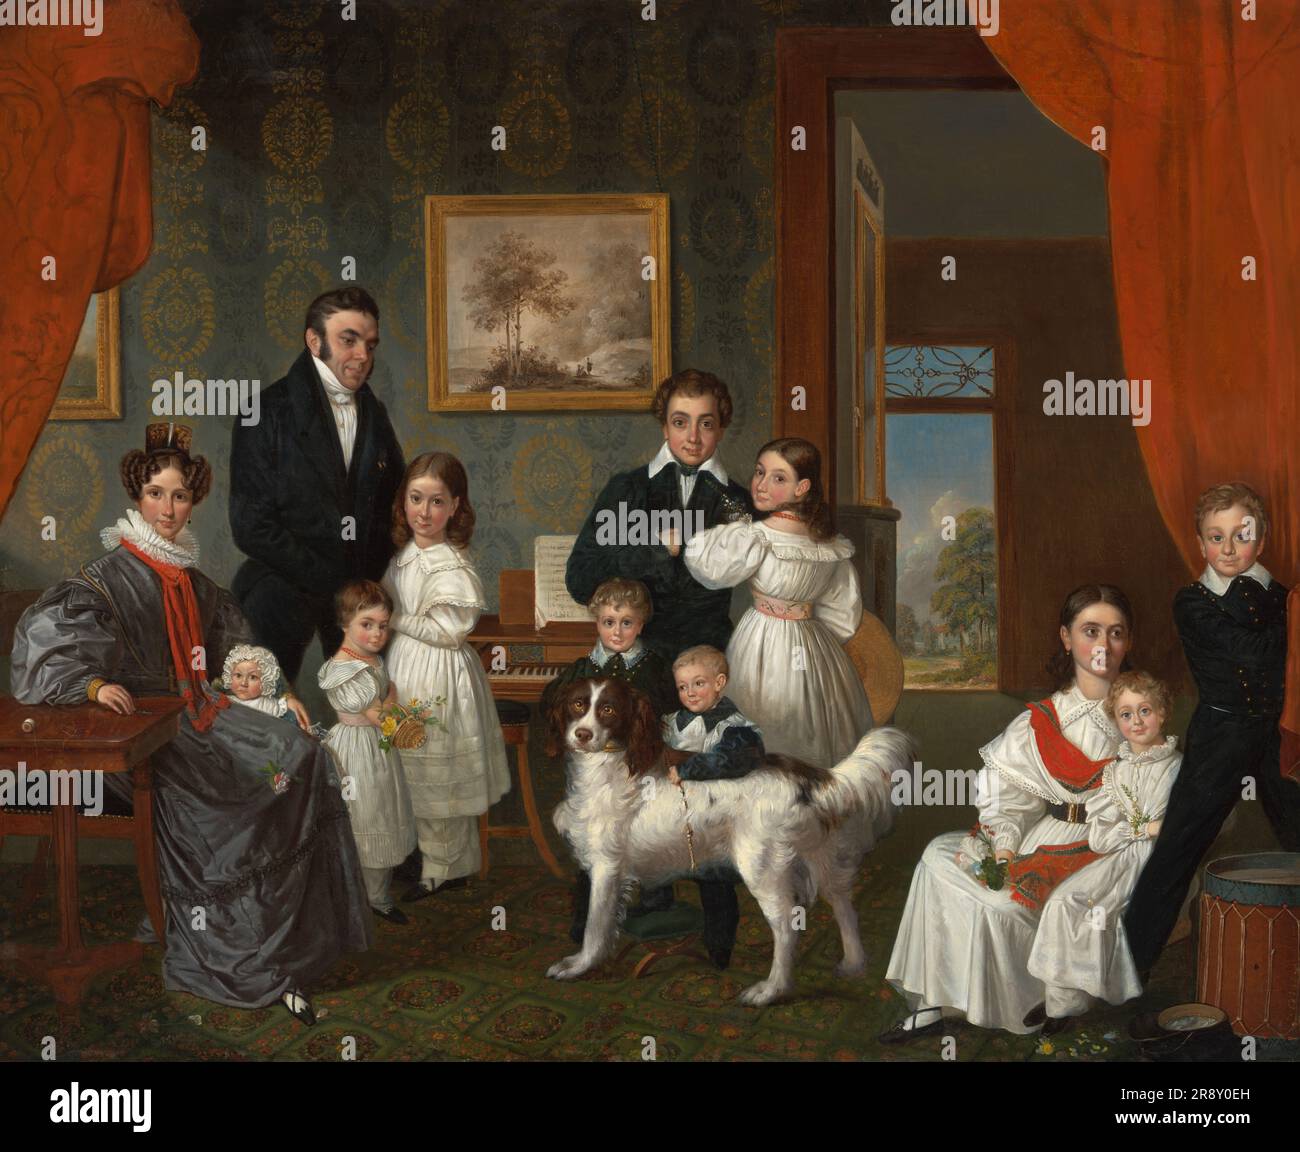 Portrait of the Baud family in their country house in Voorburg, 1831-1832. Baud 1789-1859) was Governor-General of the Dutch East Indies from 1833 until 1836. The painter Raden Saleh is considered to be the first &quot;modern&quot; artist from Indonesia (then the Dutch East Indies). He travelled to Europe to study painting, and became the first indigenous Indonesian to be initiated into Freemasonry. After 20 years in Europe he returned to the Dutch East Indies and worked as conservator for the colonial collection of government art, and acted as court painter to the Governors-General. Stock Photo